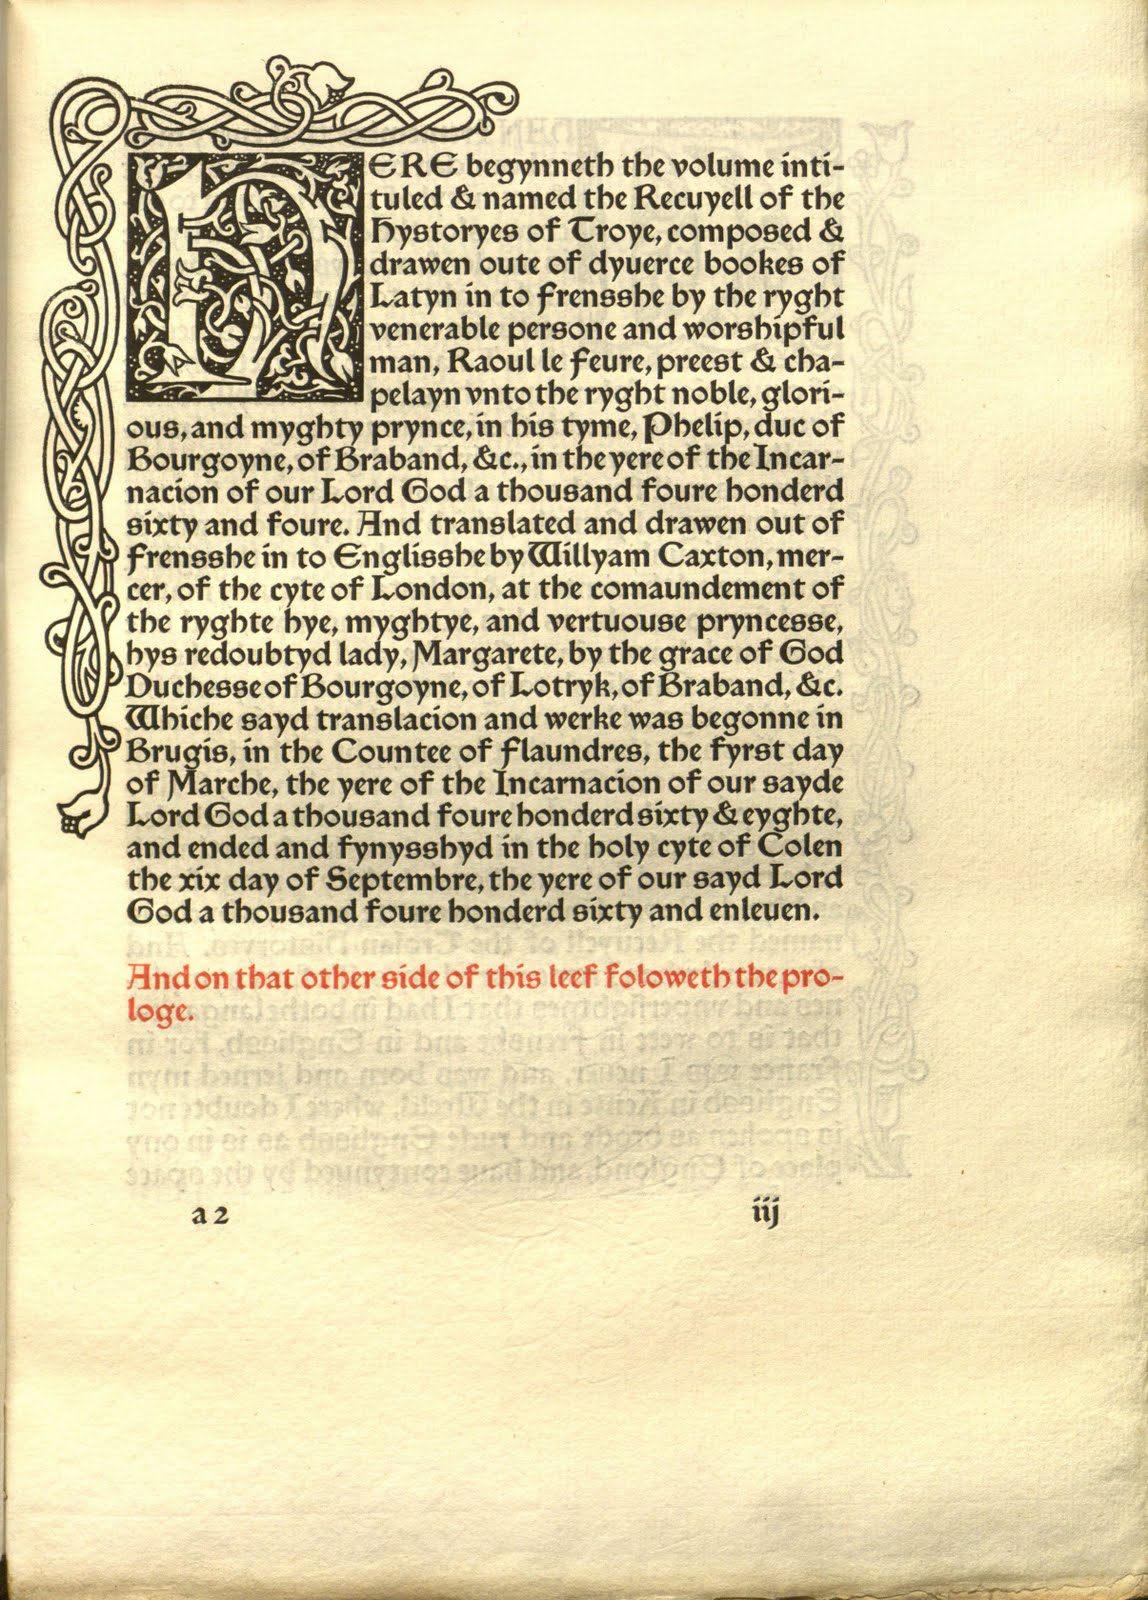 Page iii in its entirety with border and illustrated cap with text that begins:  "Here begynneth the volume intituled and named The Recuyell of the Historyes of Troye"